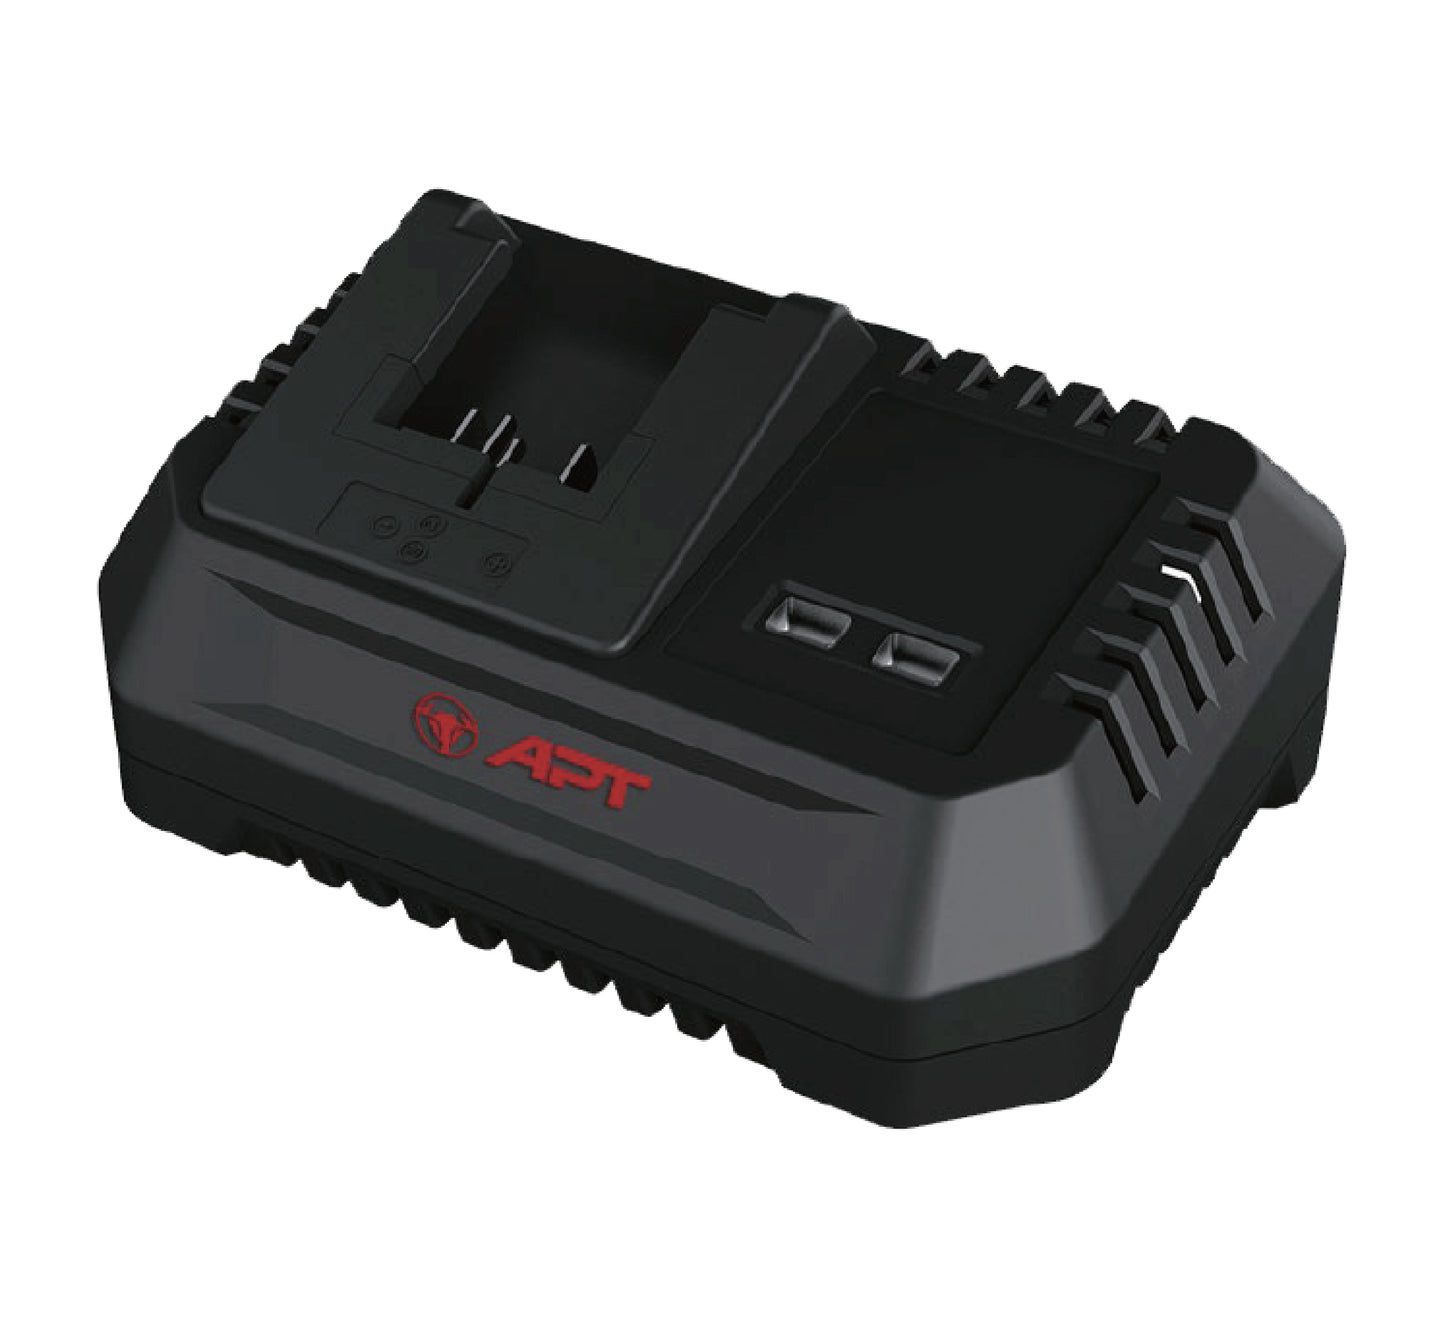 APT FAST BATTERY CHARGER 20V 2.0A.H DW5500202